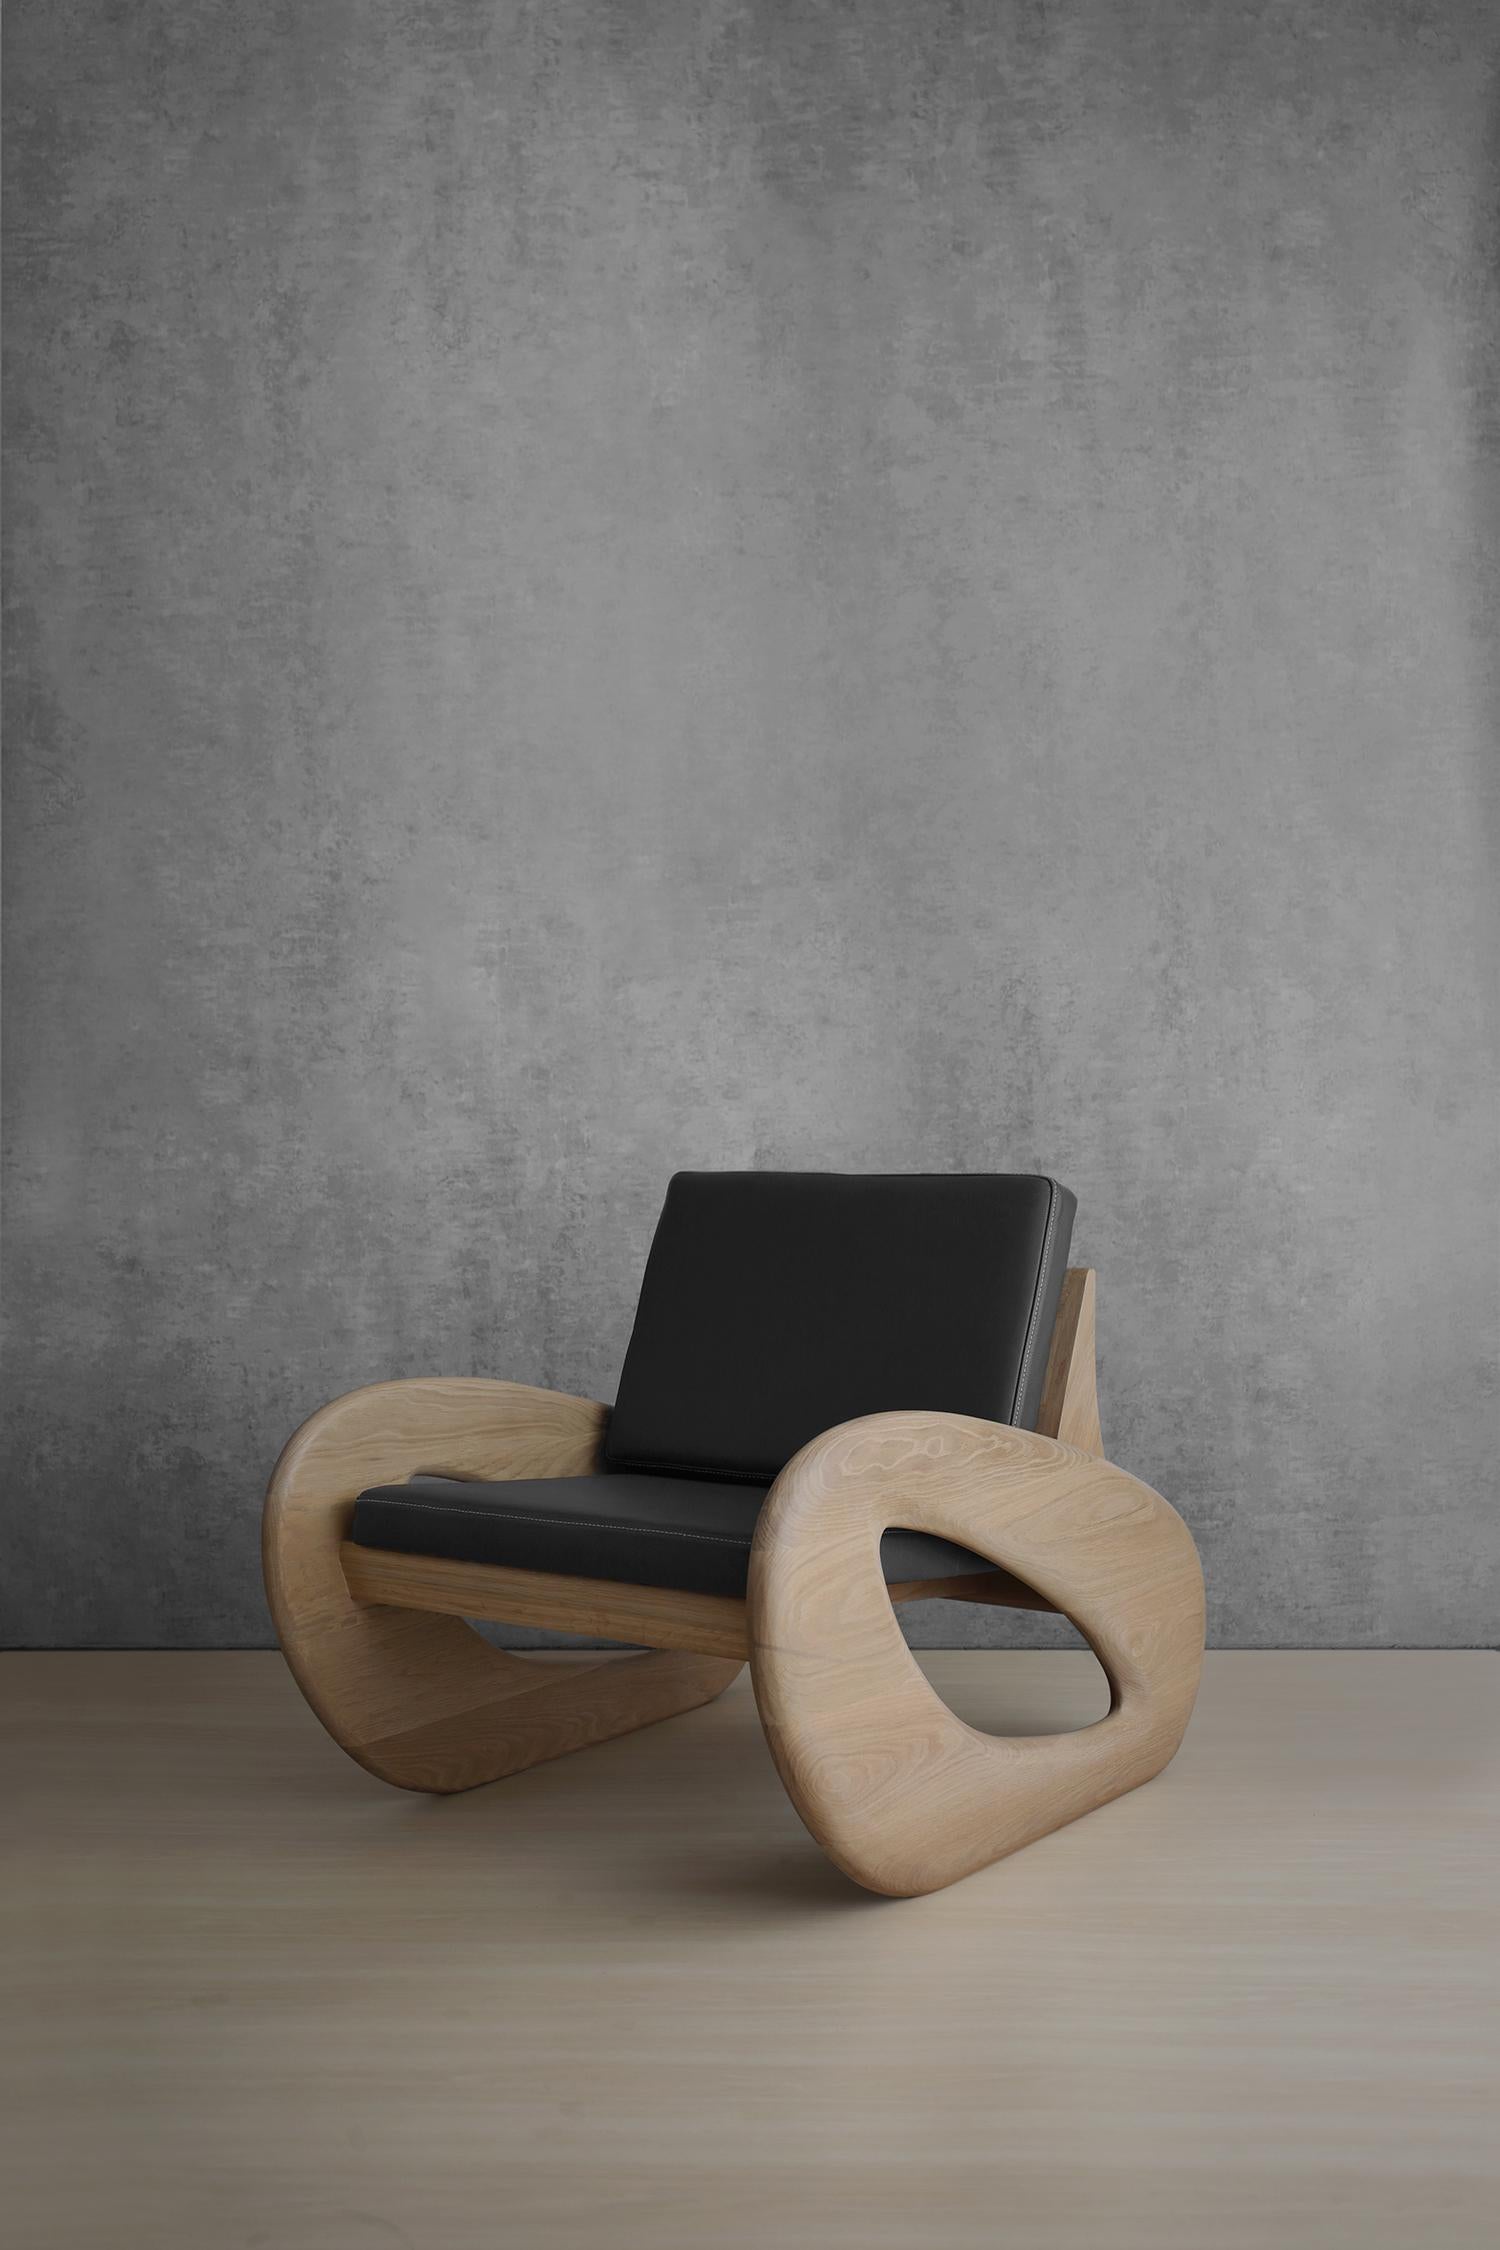 Set of 2 XVII Sherman lounge chairs by Arturo Verástegui
Dimensions: D 82 x W 109 x H 81 cm
Materials: oak wood, leather.

Lounge chair made of white oak or burnt finish white oak option and leather.

Arturo Verástegui has been the director